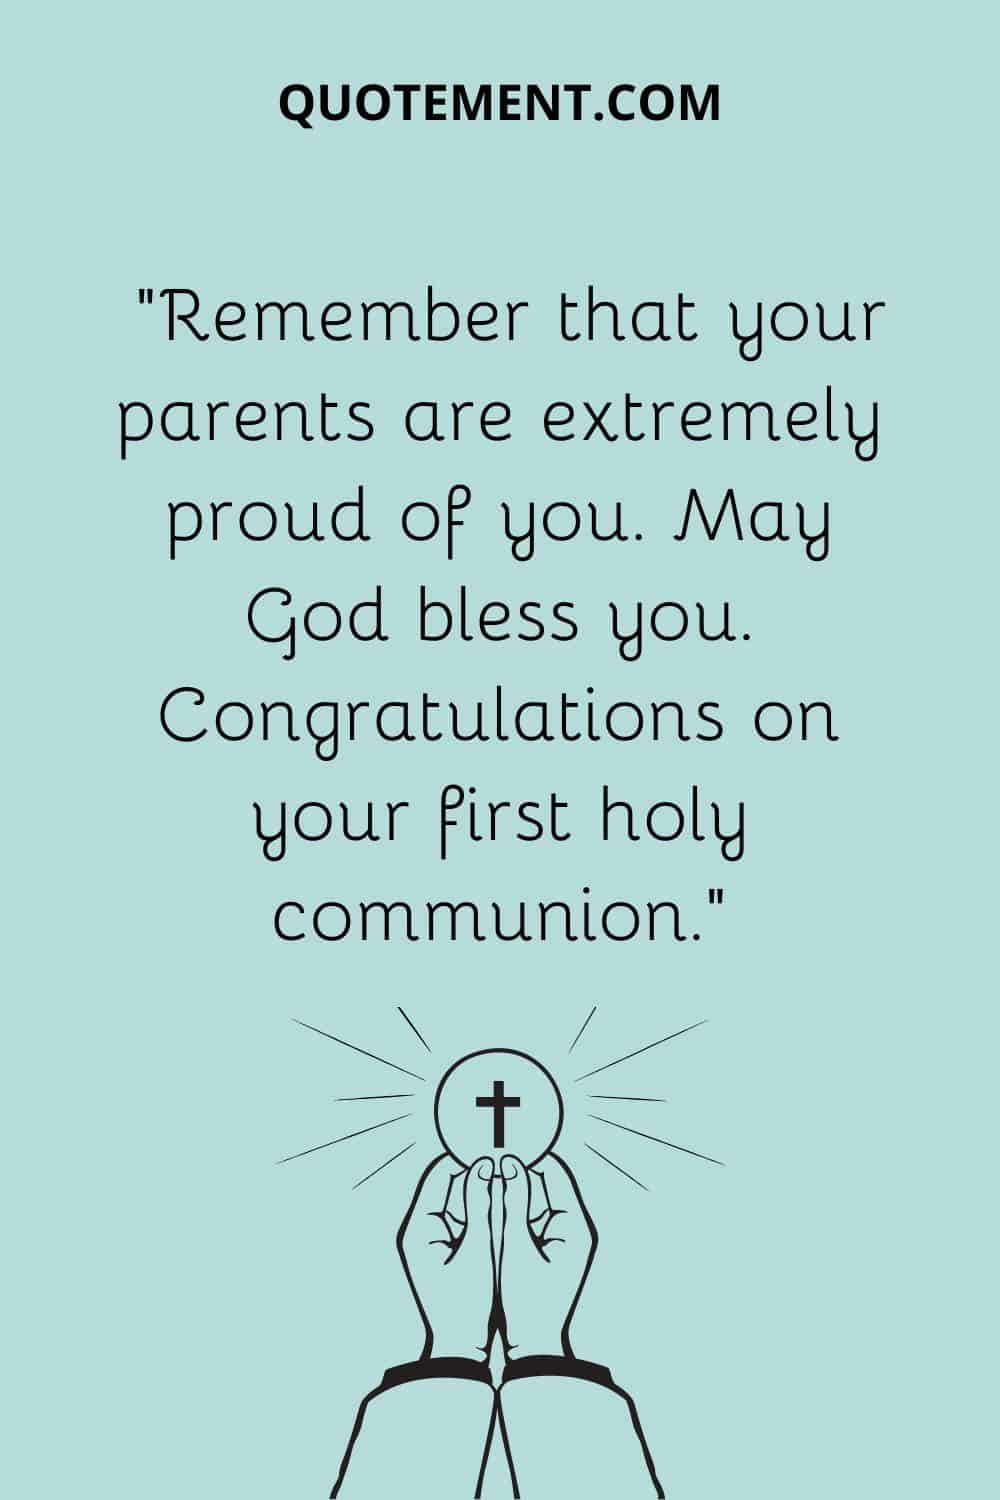 “Remember that your parents are extremely proud of you. May God bless you. Congratulations on your first holy communion.”